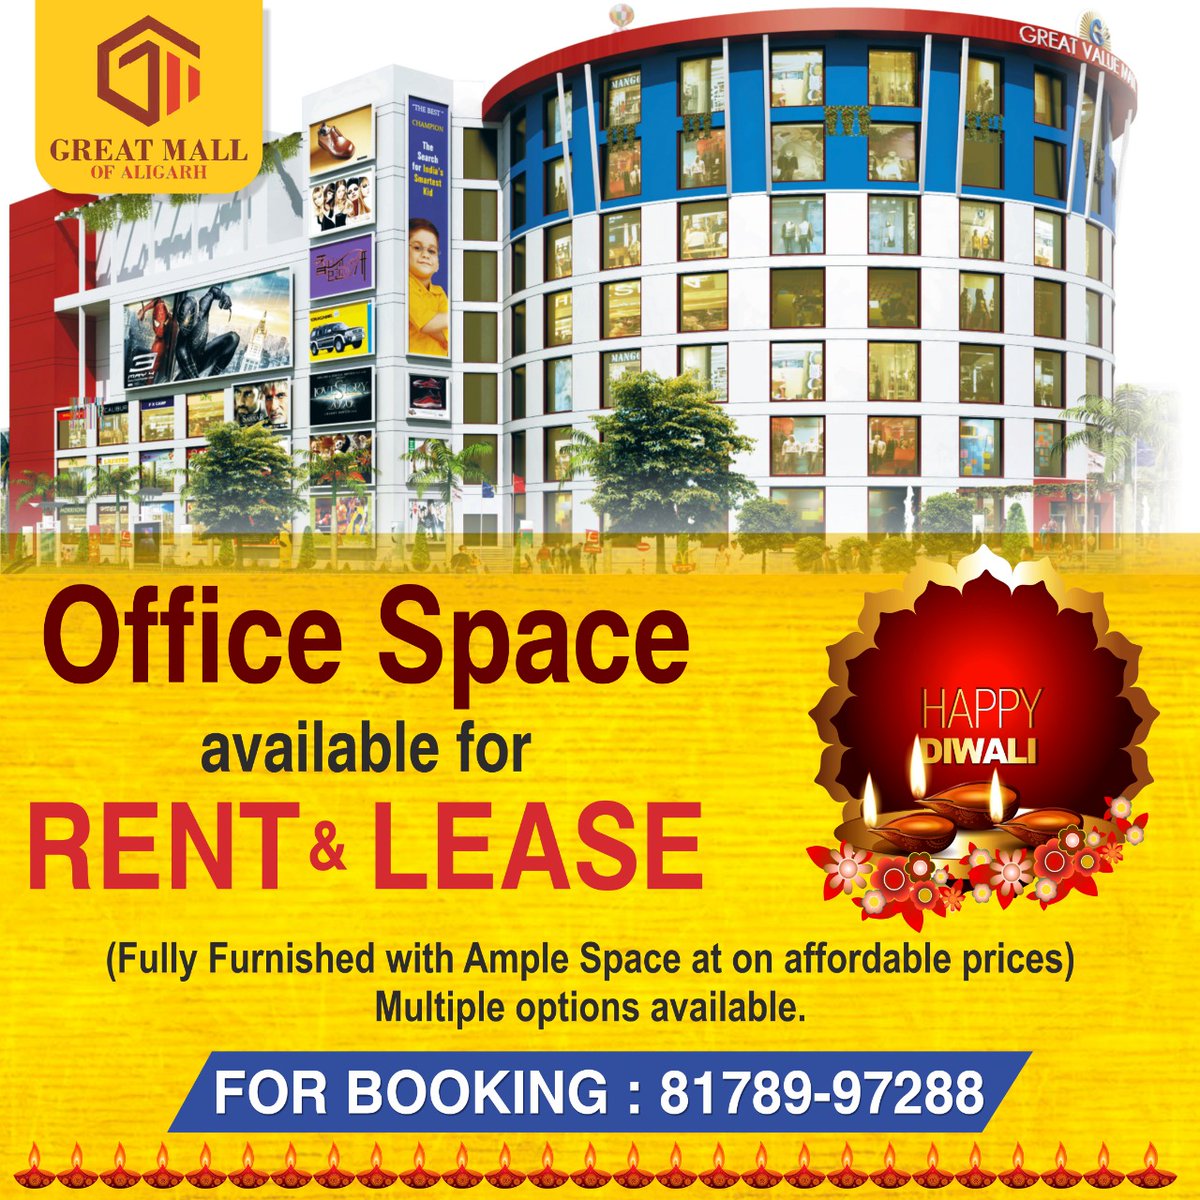 📢 If you are looking for fully furnished office spaces for rent & lease in Great Mall of Aligarh at cost effective price then contact us immediately. 
🪔 Book Now @ 8178997288 
✅ Space Available for: 
#Retail #Commercial #officespace #officeforrent #Aligarh #GreatMallofAligarh